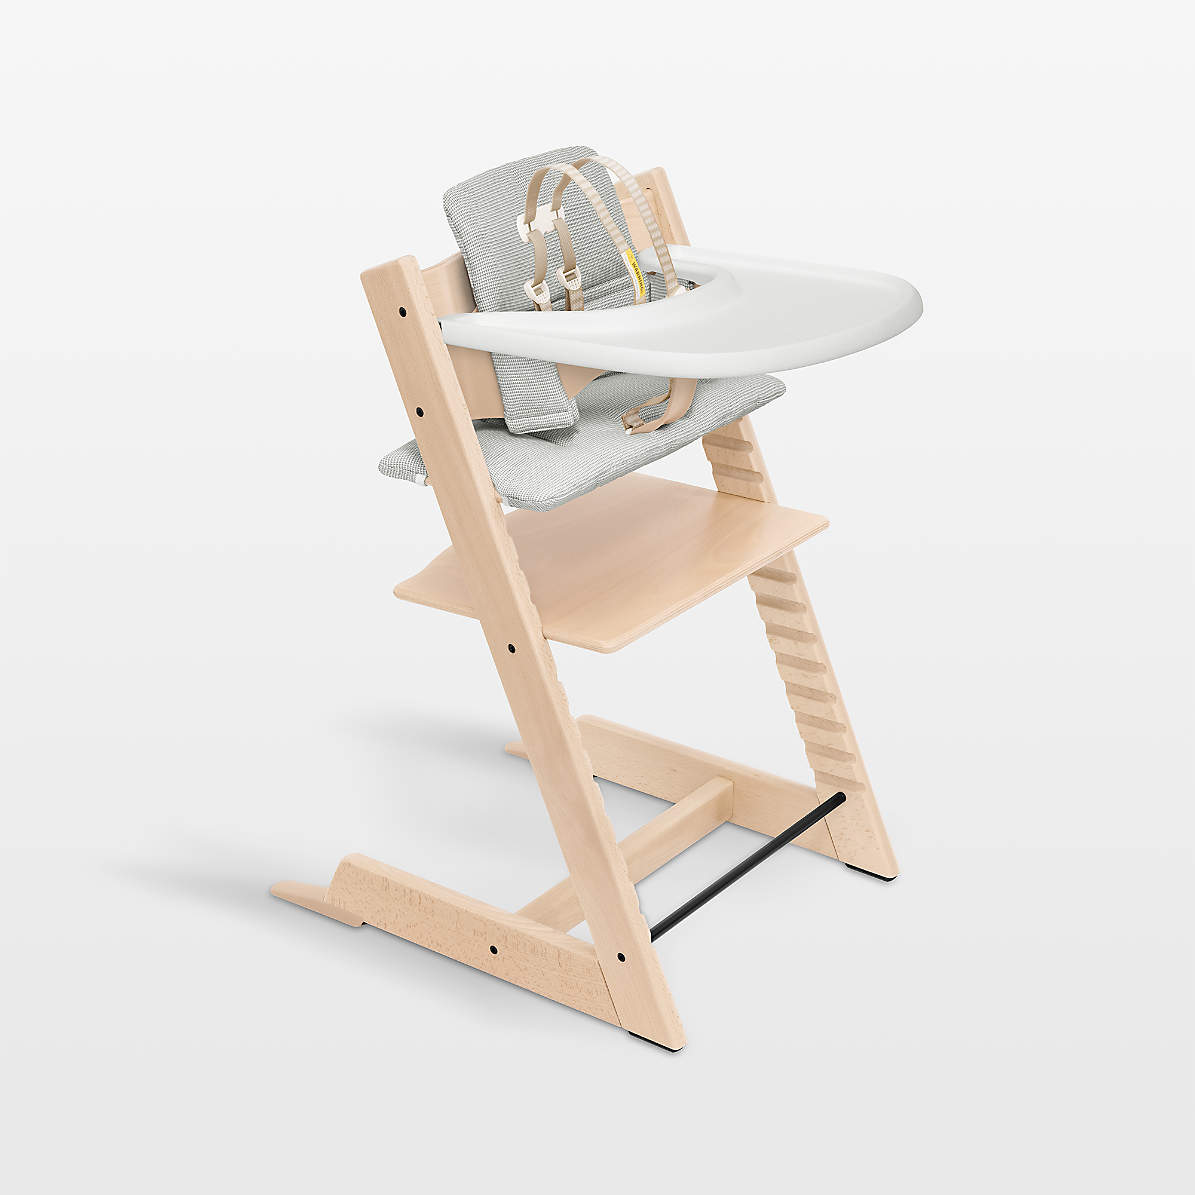 Stokke Tripp Trapp High Chairs & Cushions with Trays – Babies in Bloom